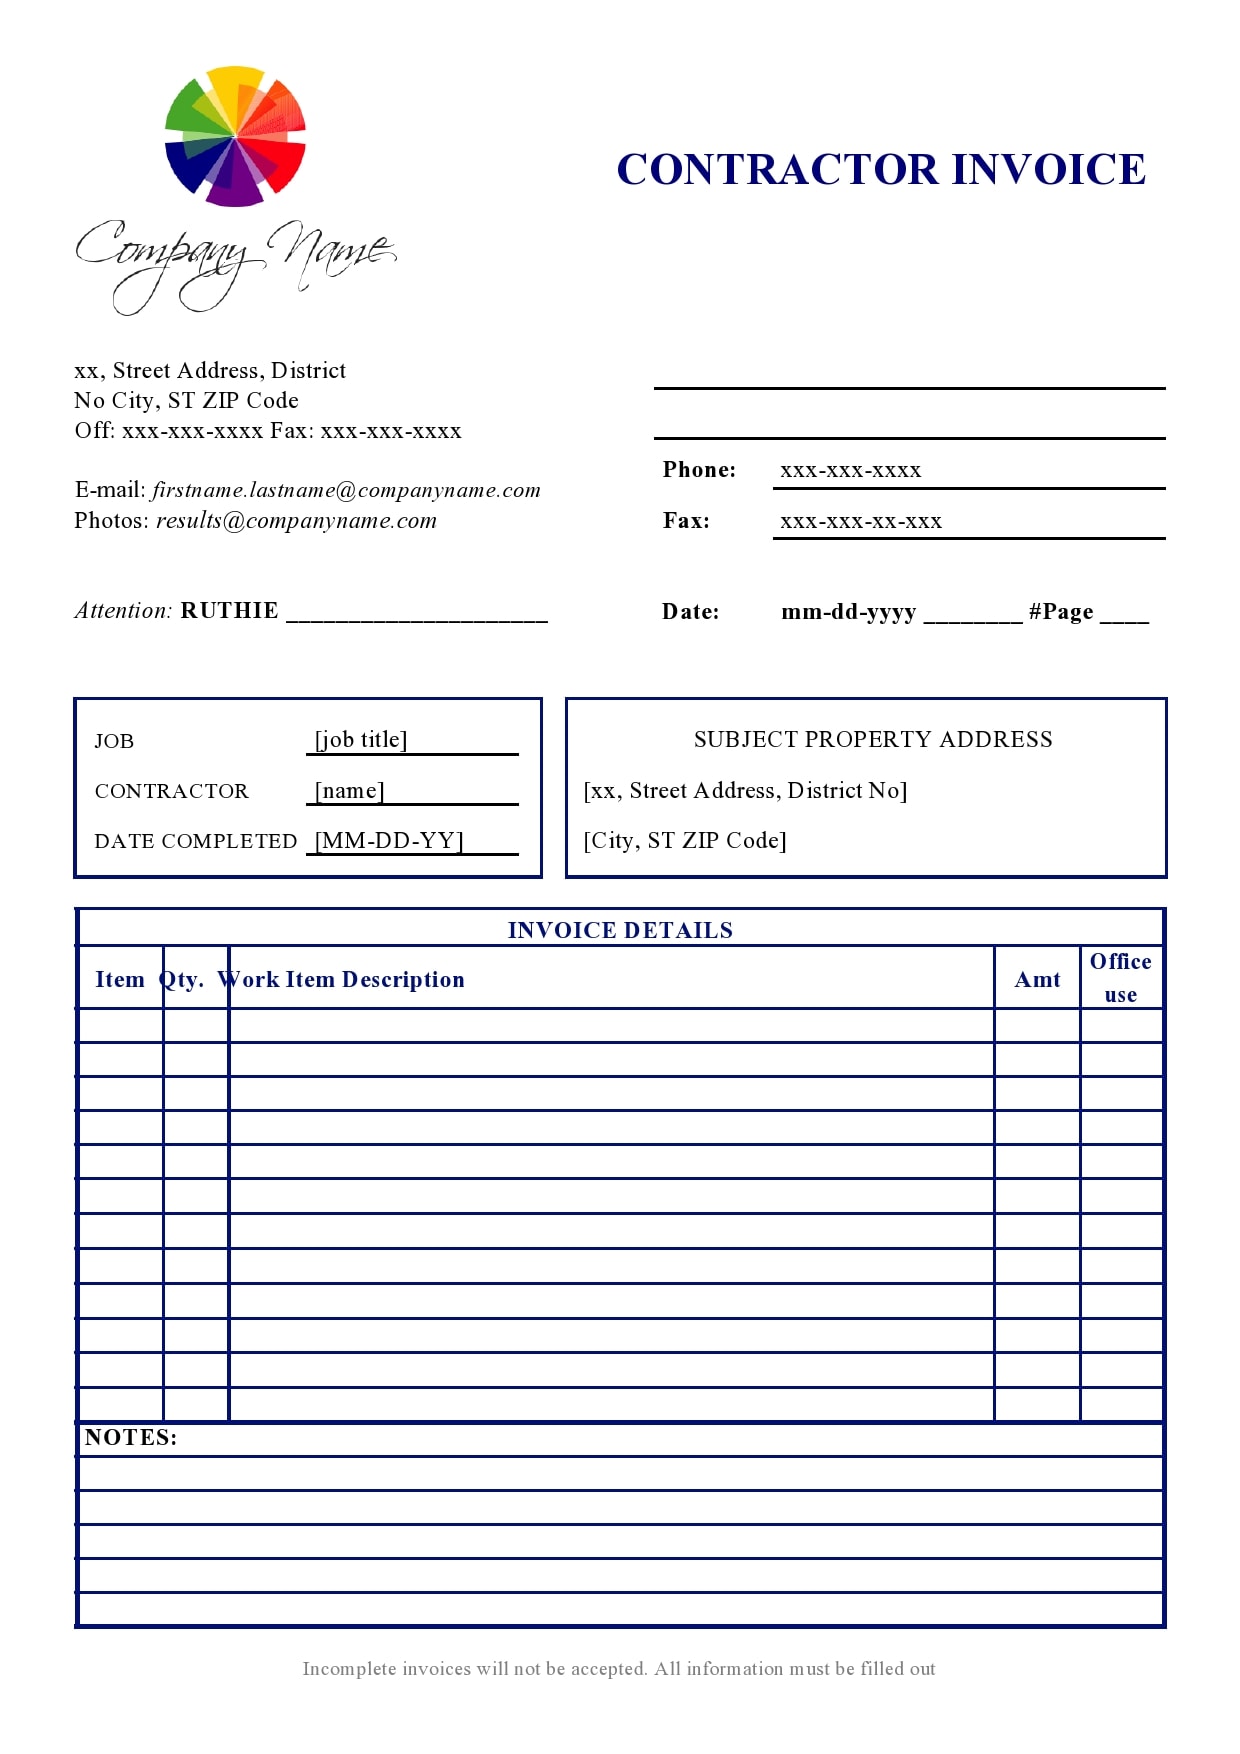 28 Independent Contractor Invoice Templates FREE 